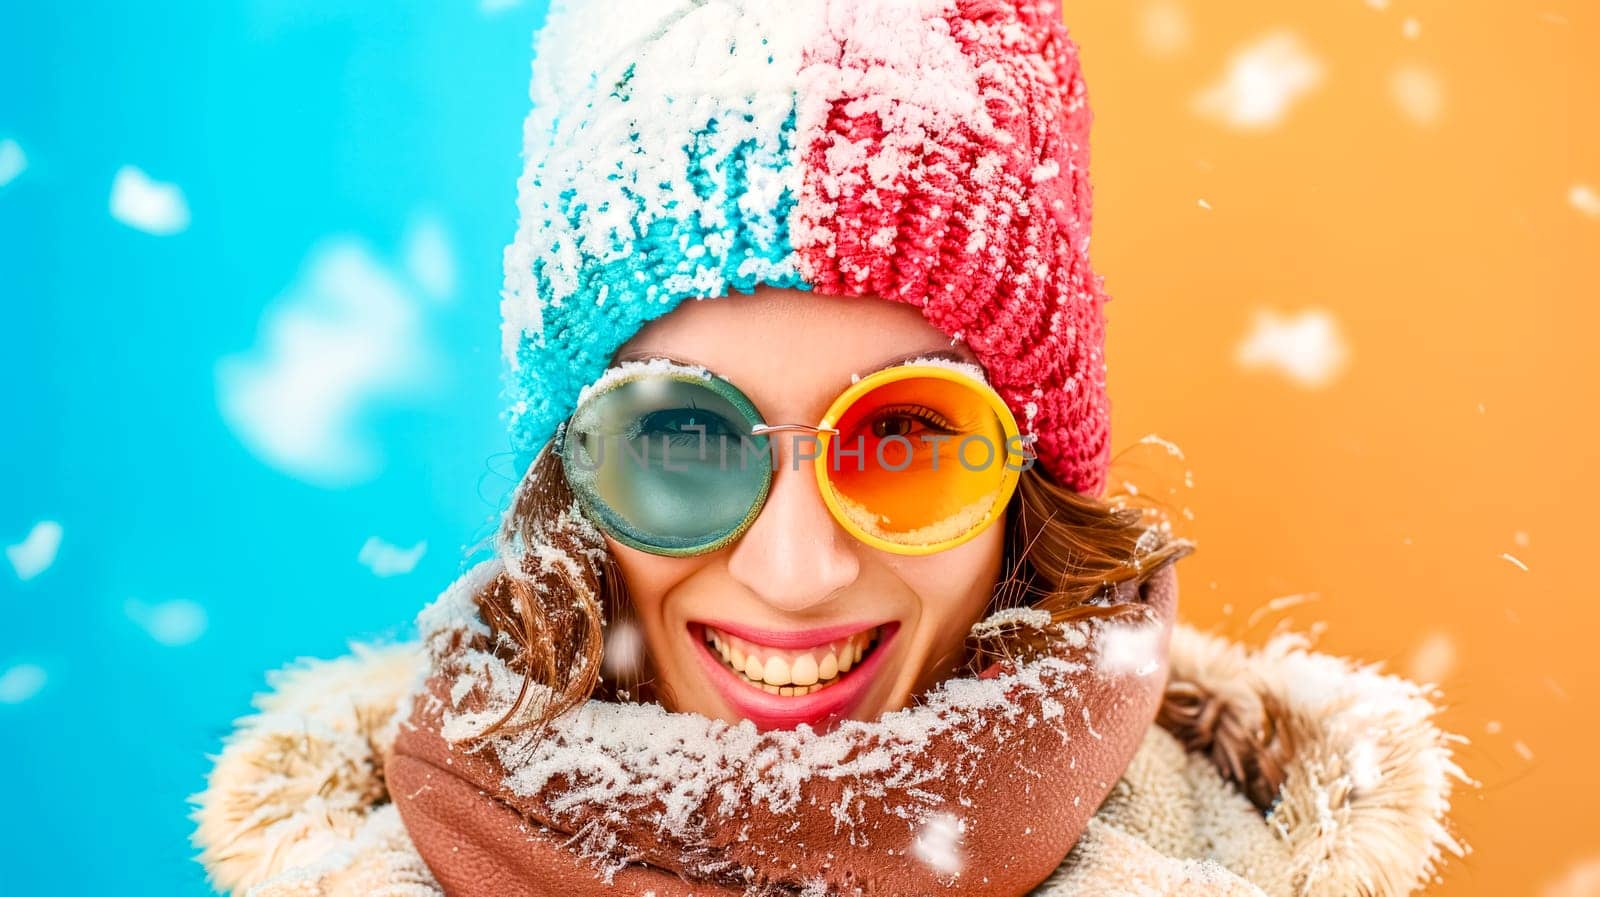 Winter joy: young woman smiling in snowy weather by Edophoto